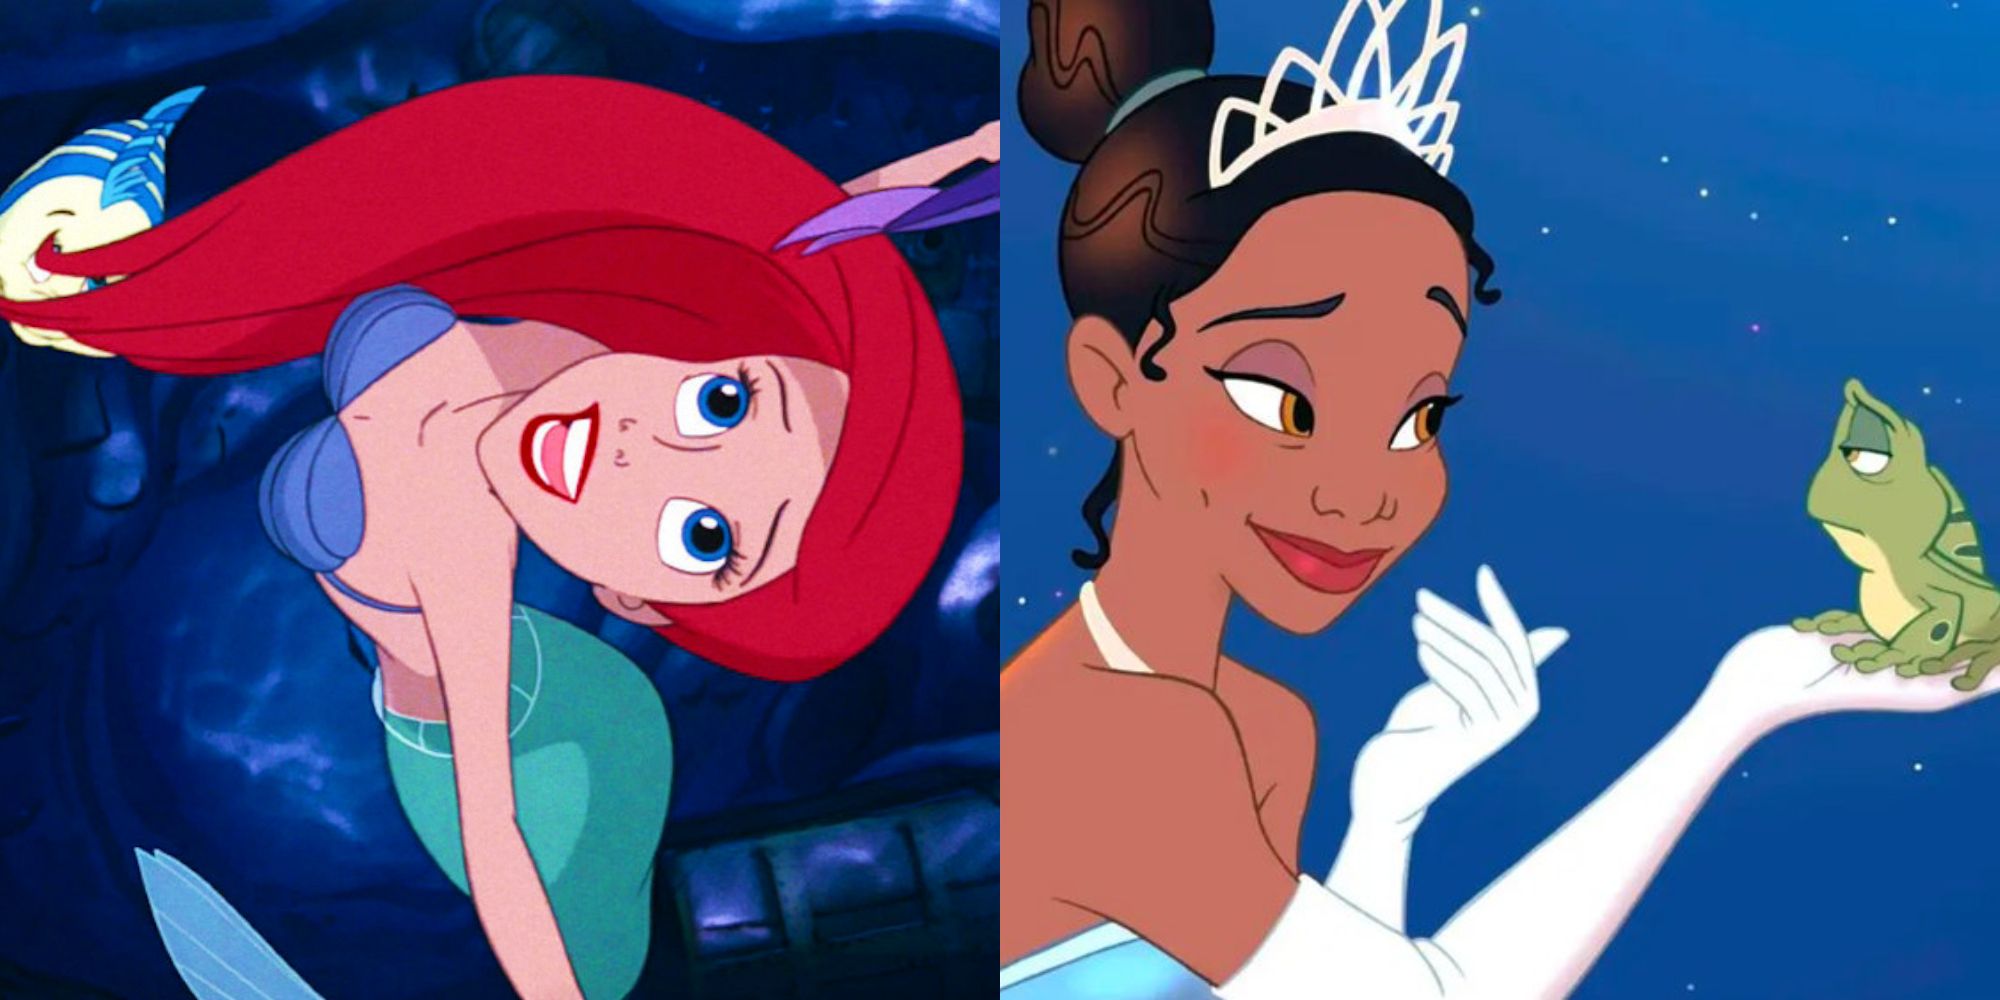 Split image: Ariel swimming under the sea, Tiana with the frog in her hand